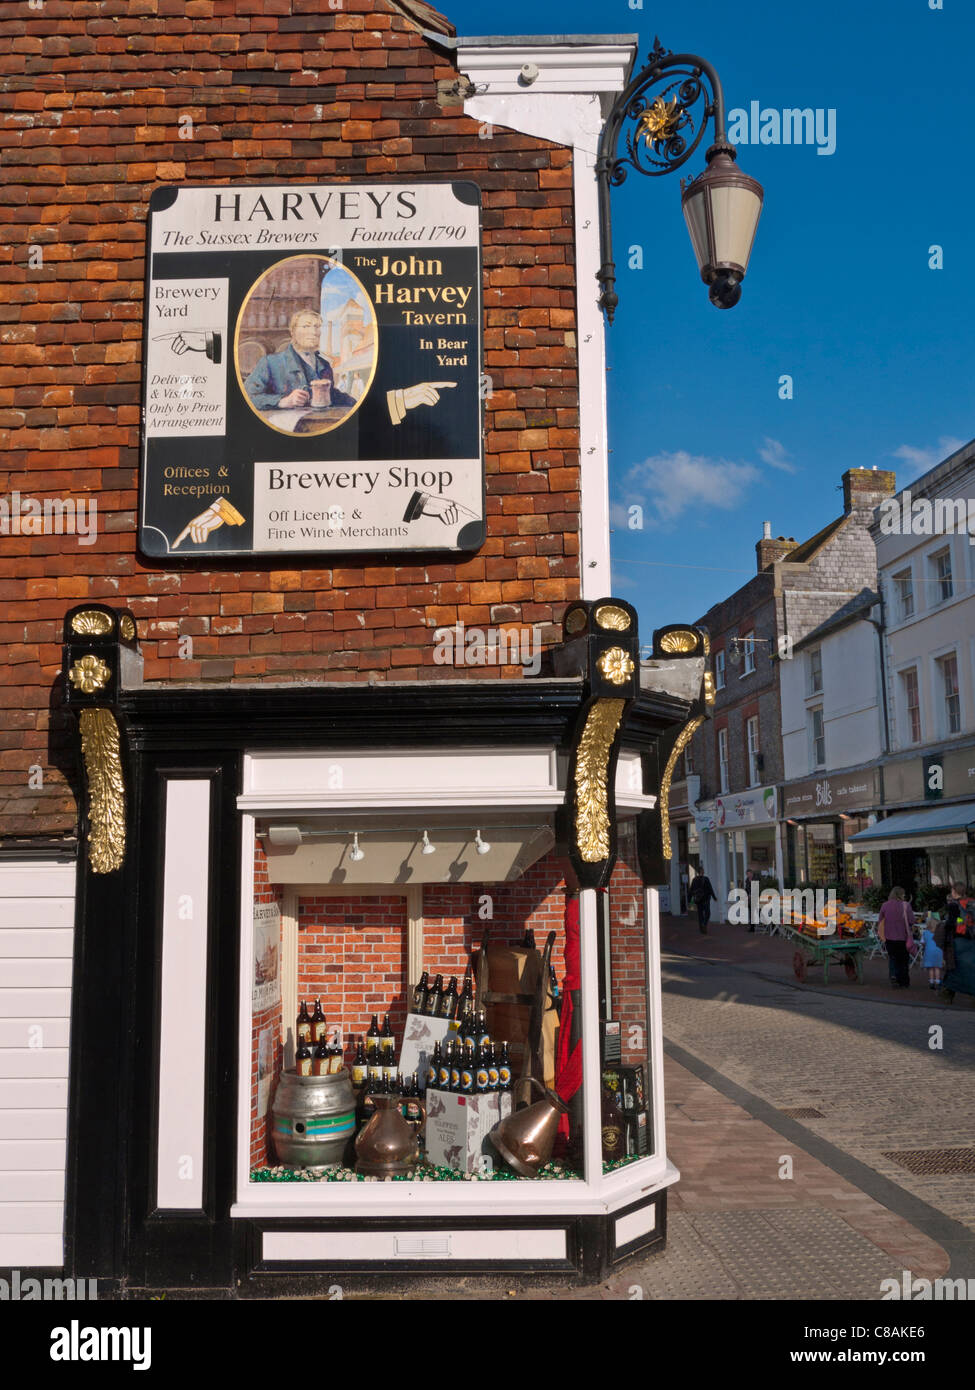 Harveys historic brewery shop and lower High Street shops Lewes East Sussex UK Stock Photo